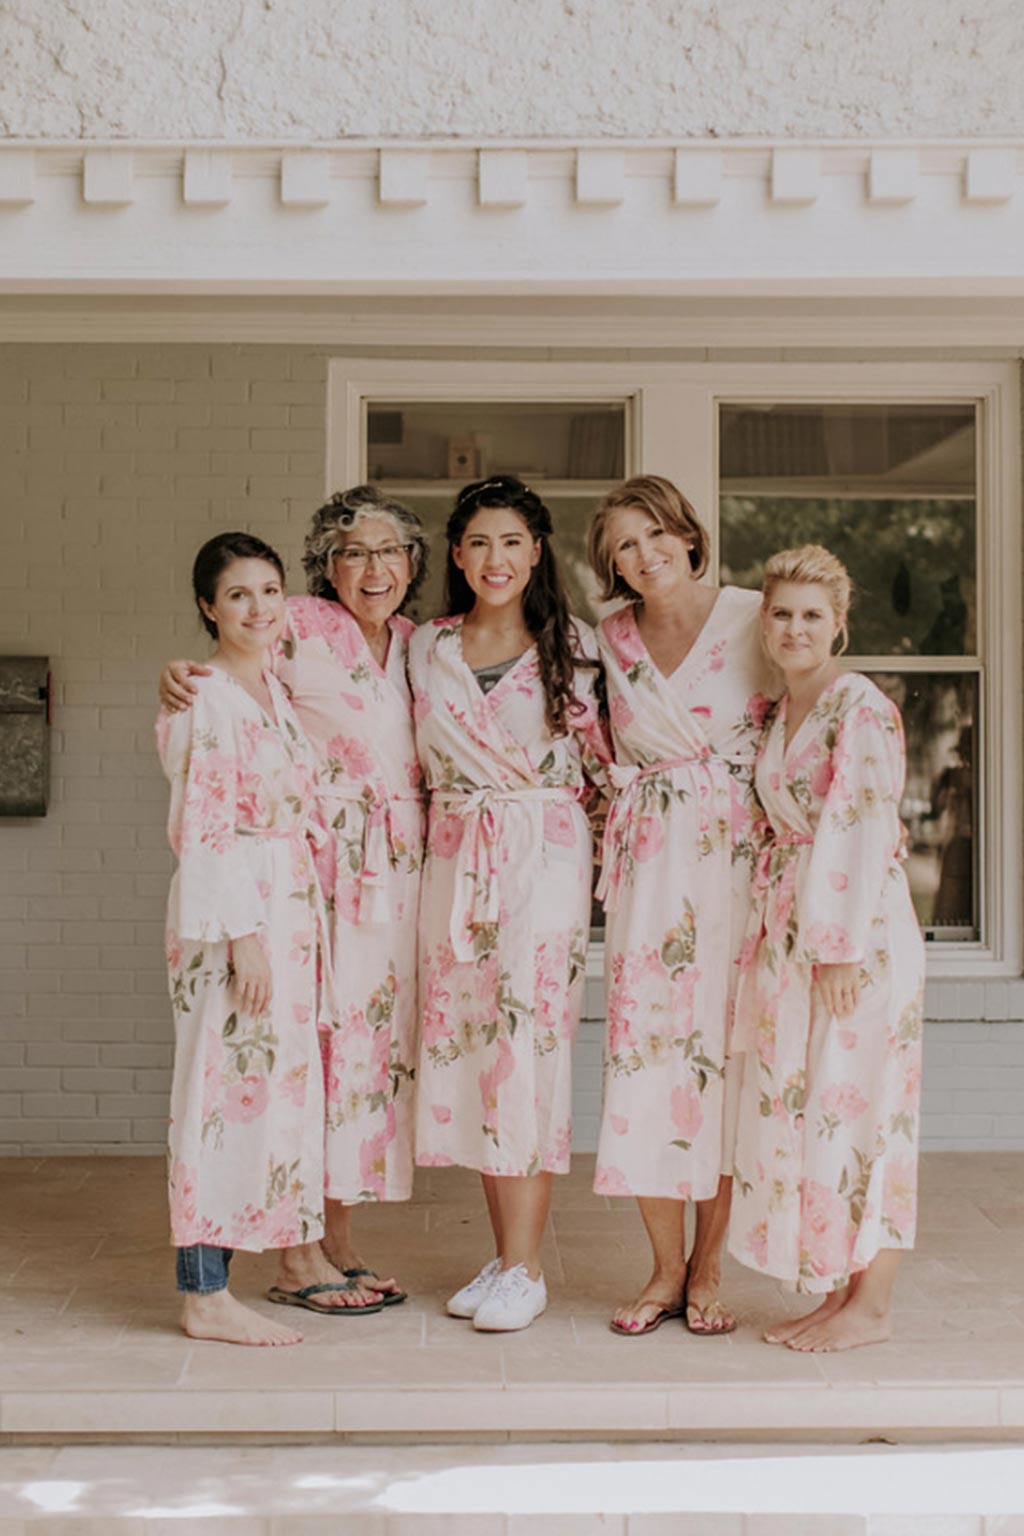 Bride and bridesmaids getting ready for wedding day with pink floral silk robes